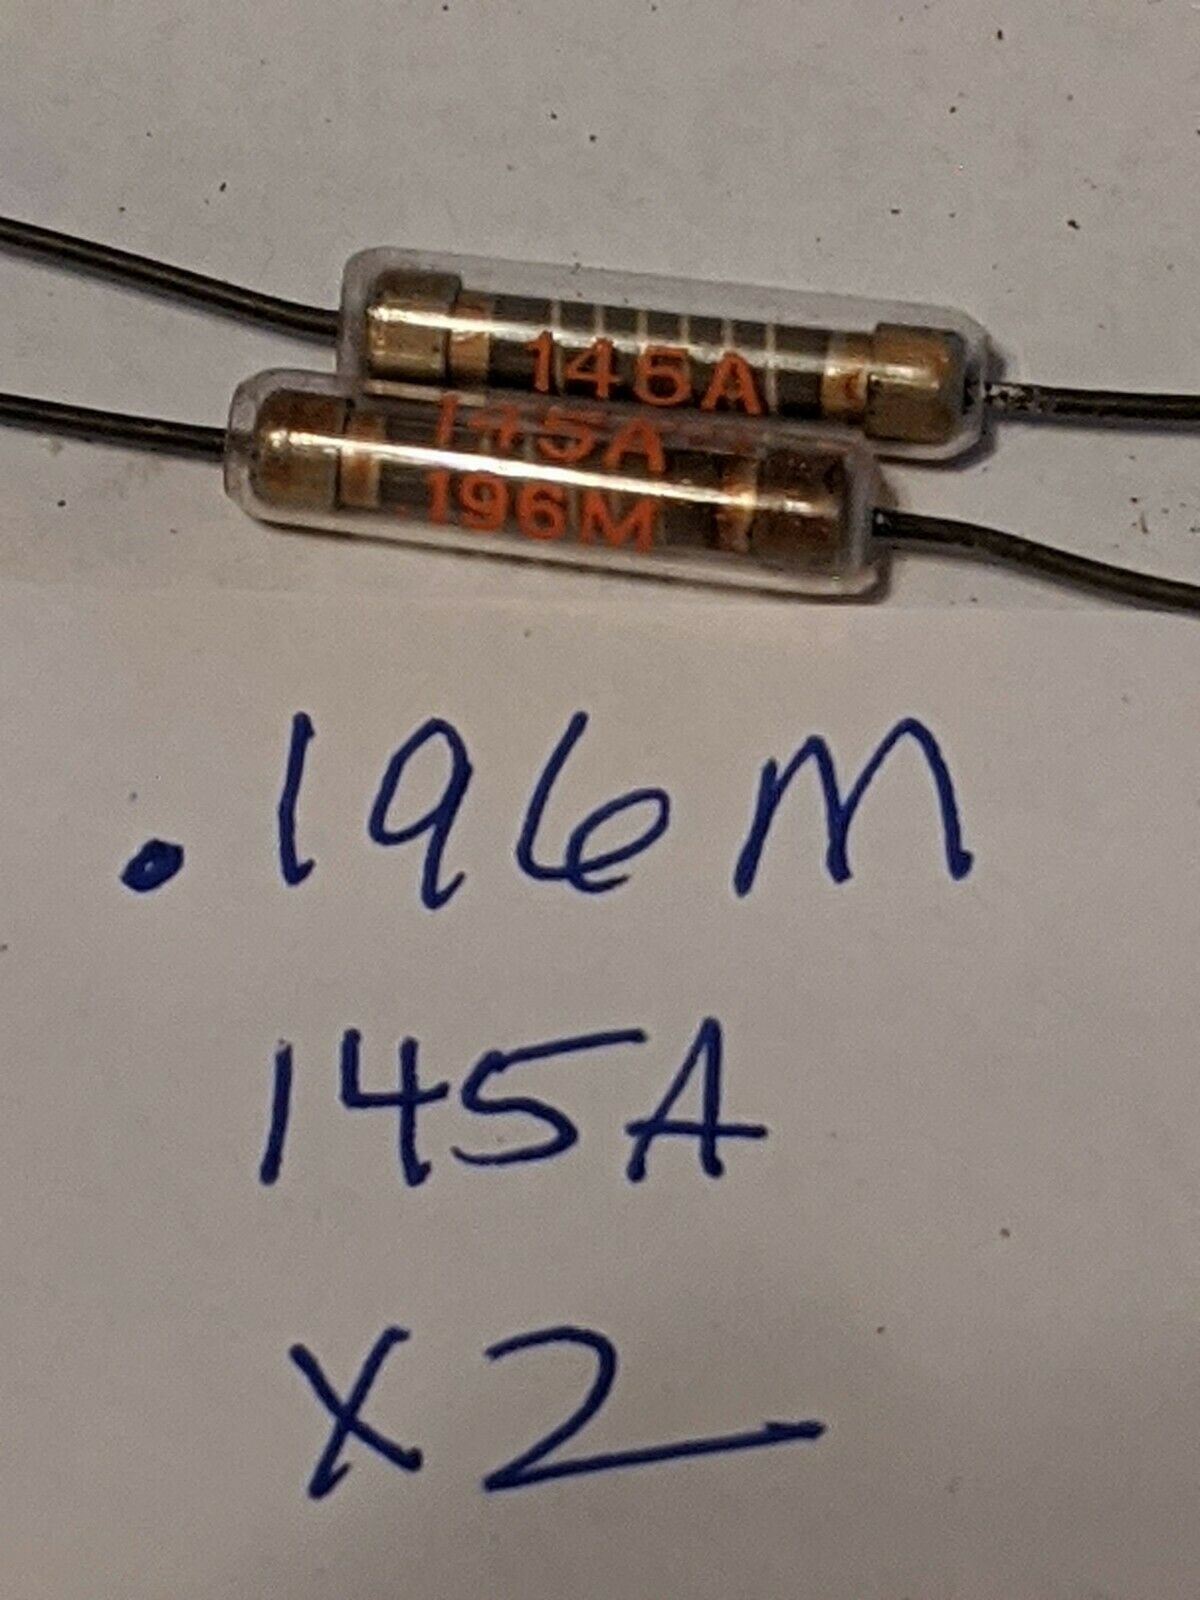 2 Pieces New Old Stock .196M Ohm Resistor